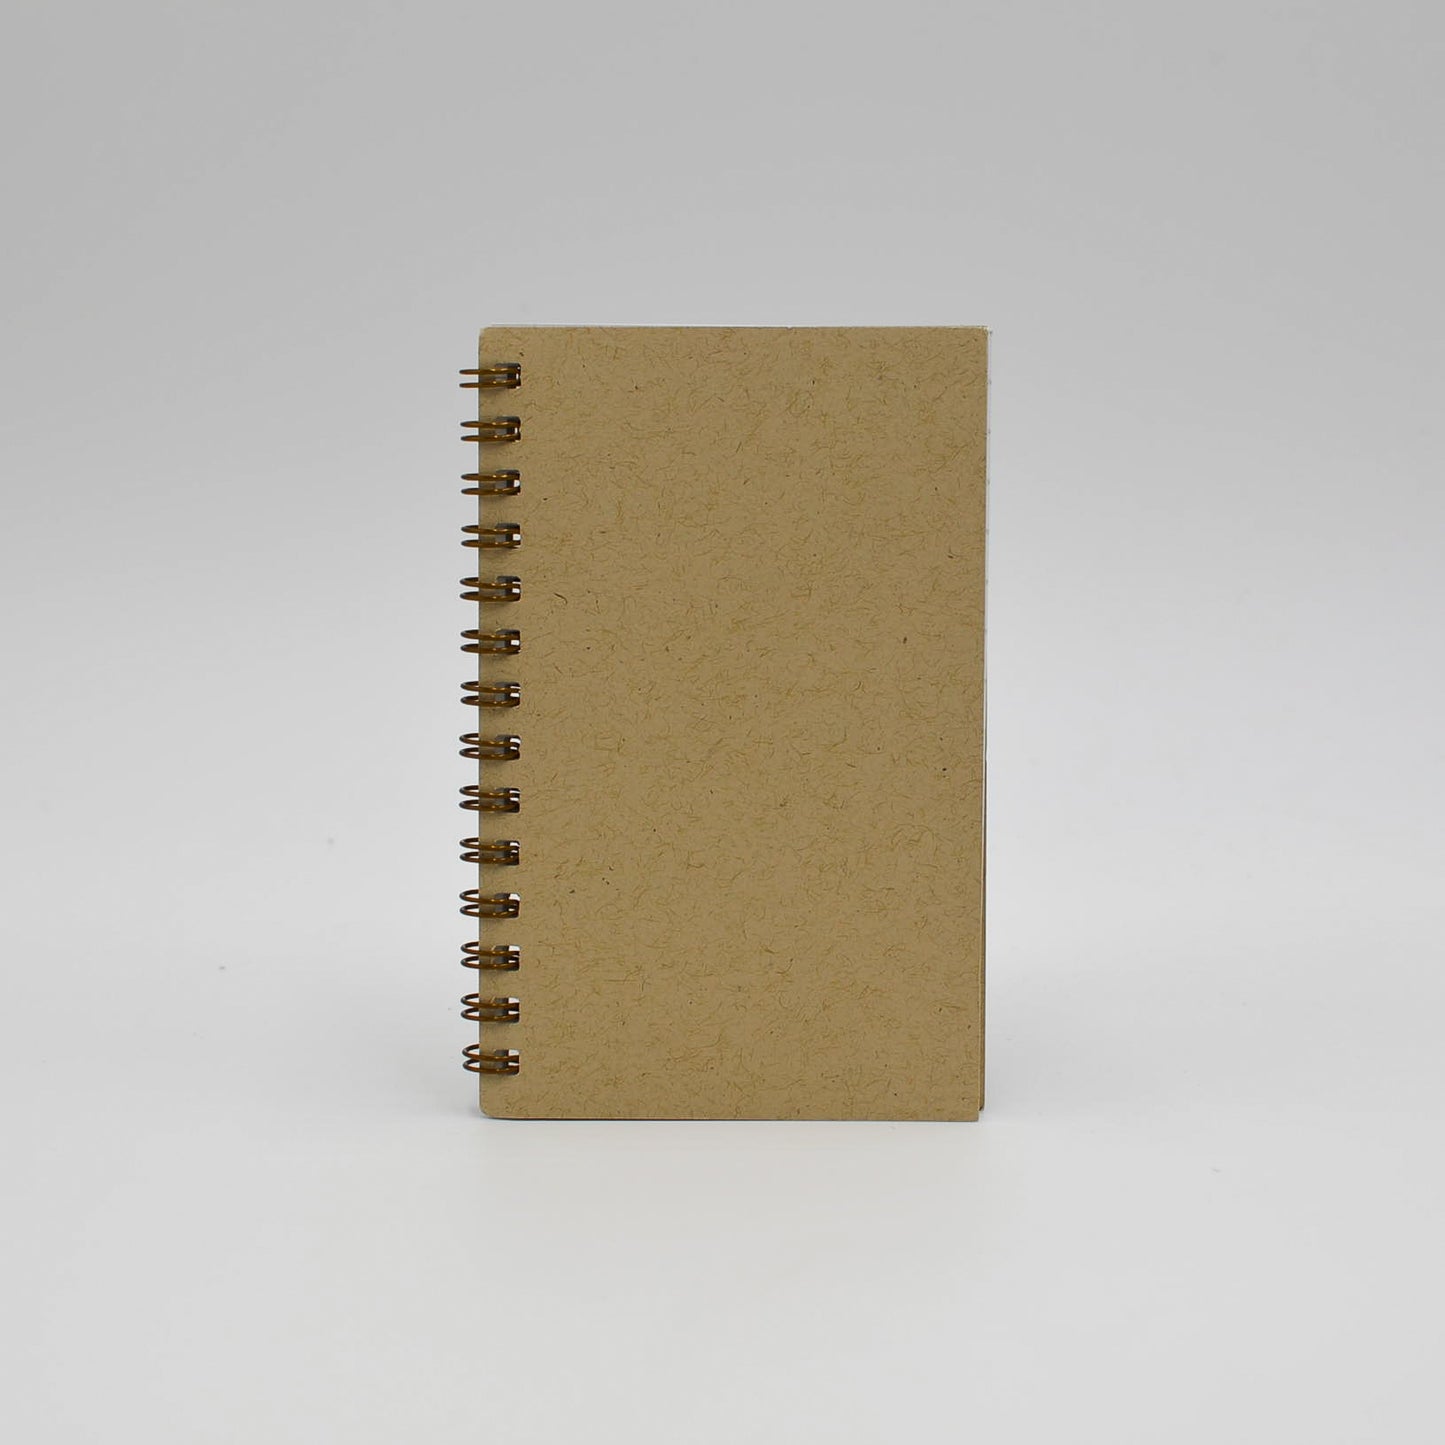 Journal Refill: 1249 Wirebound 3-1/8X5 Journals  Blank or Ruled. Black or Sand cover. 160 pages, white paper. 